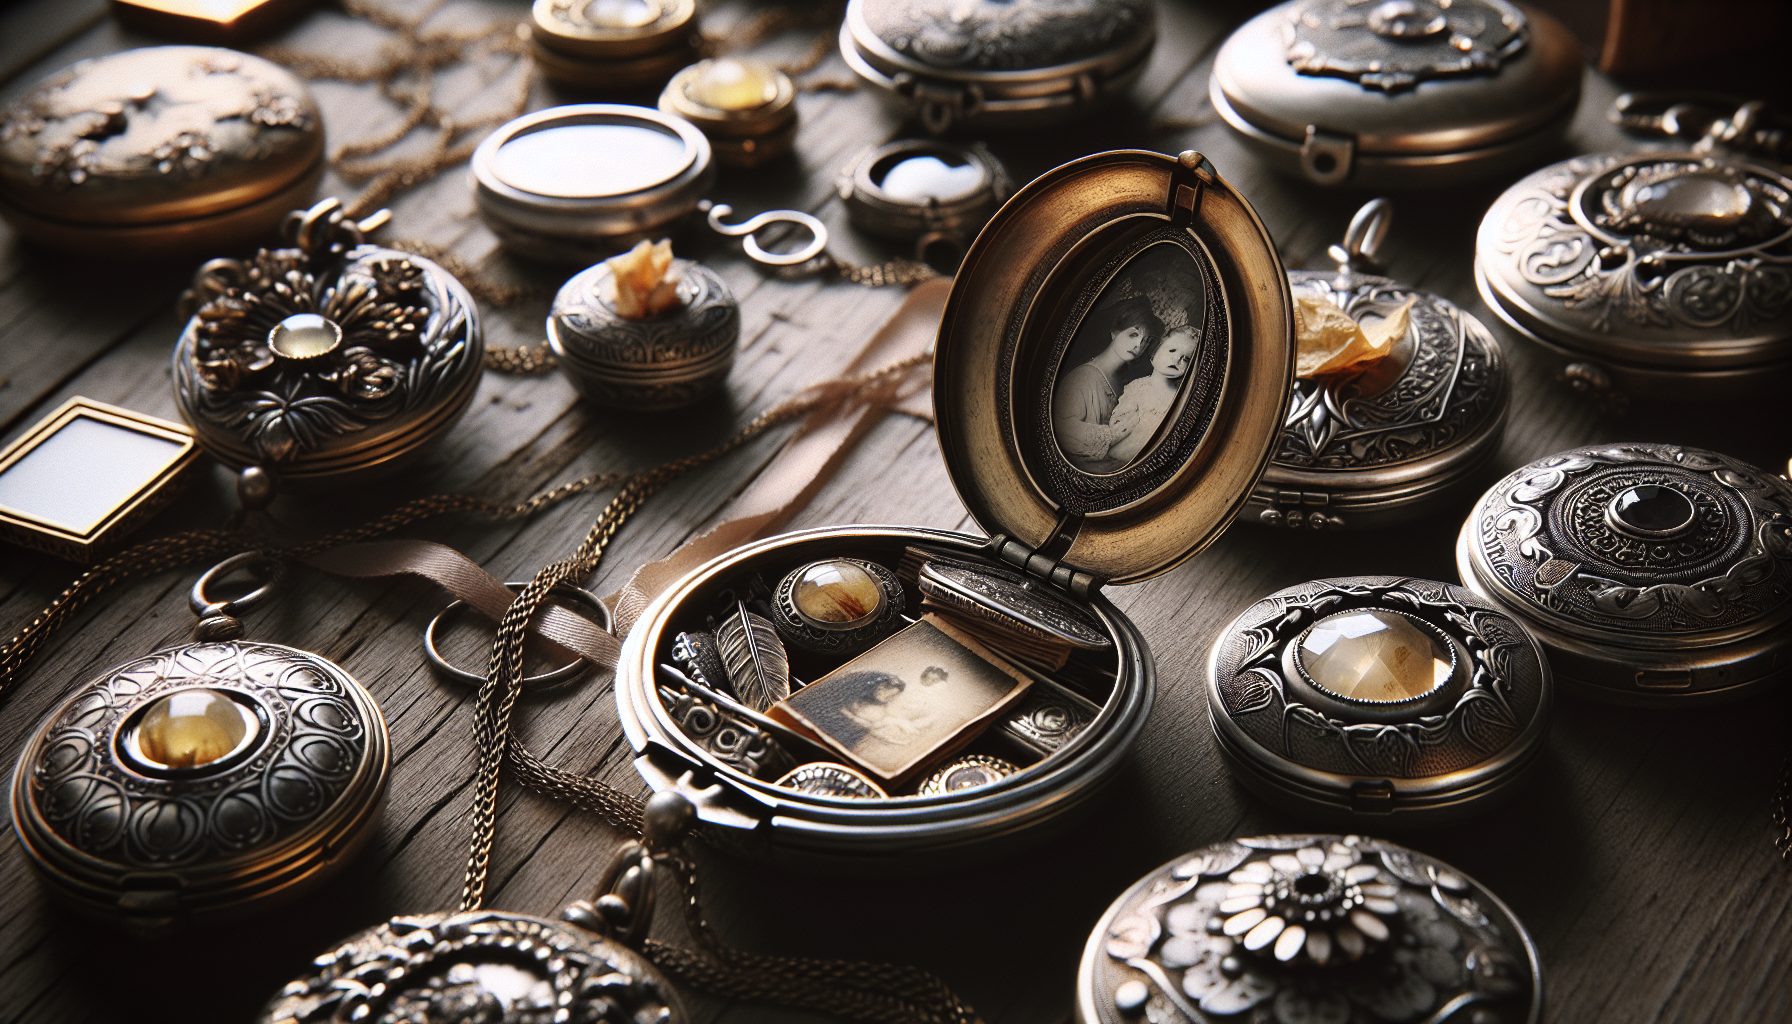 Capture the elegance and intimacy of locket pendants. The scene should include an array of vintage lockets opened up to reveal hidden memories and secrets. Each one should hold unique mementos; a blac